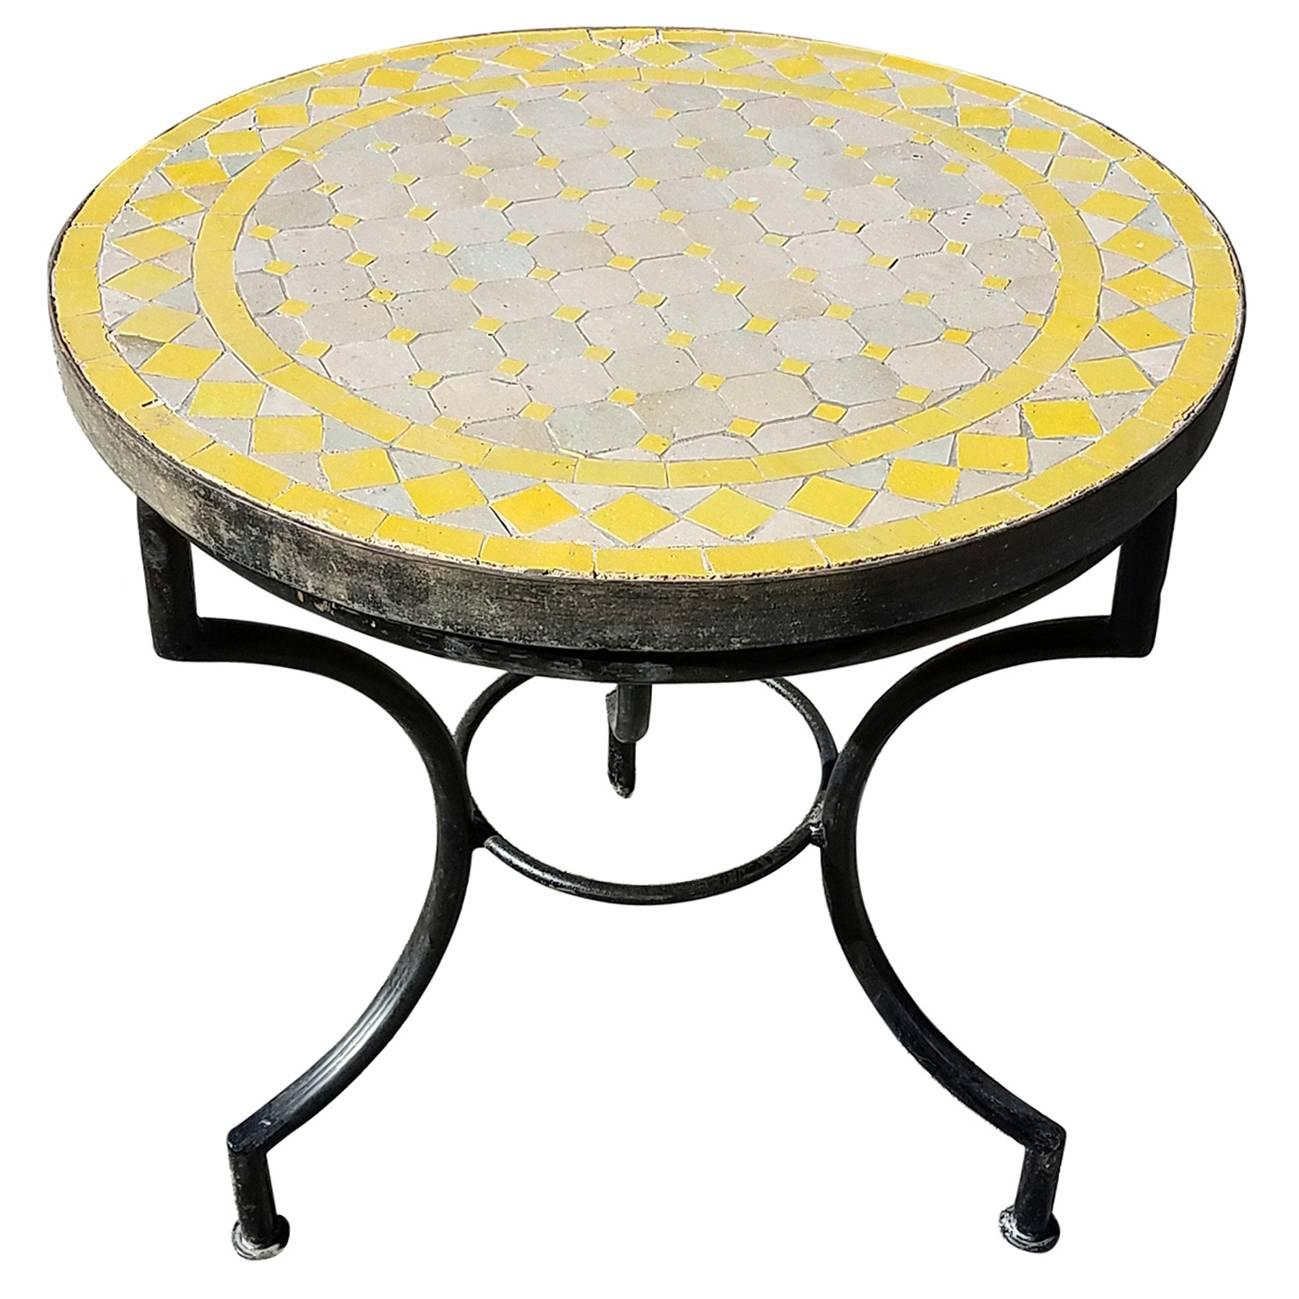 Yellow / Tan Moroccan Mosaic Table, Wrought Iron Base For Sale